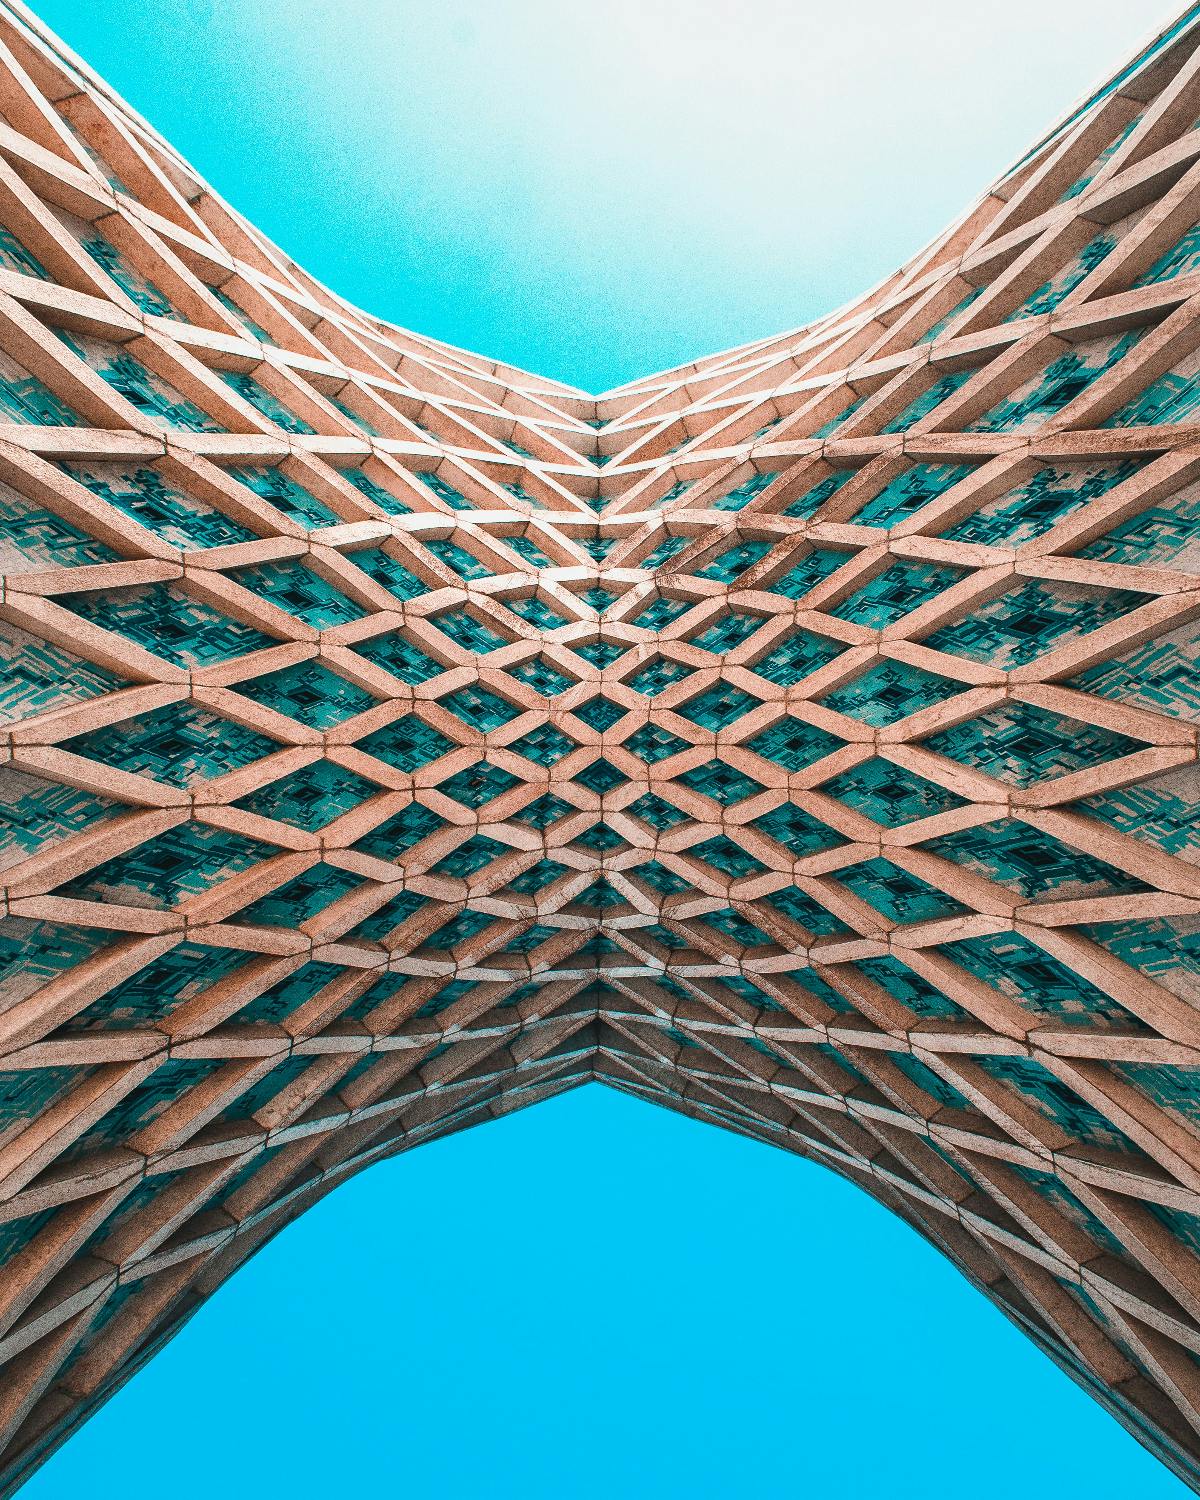 a bit of architecture that looks like a woven basket